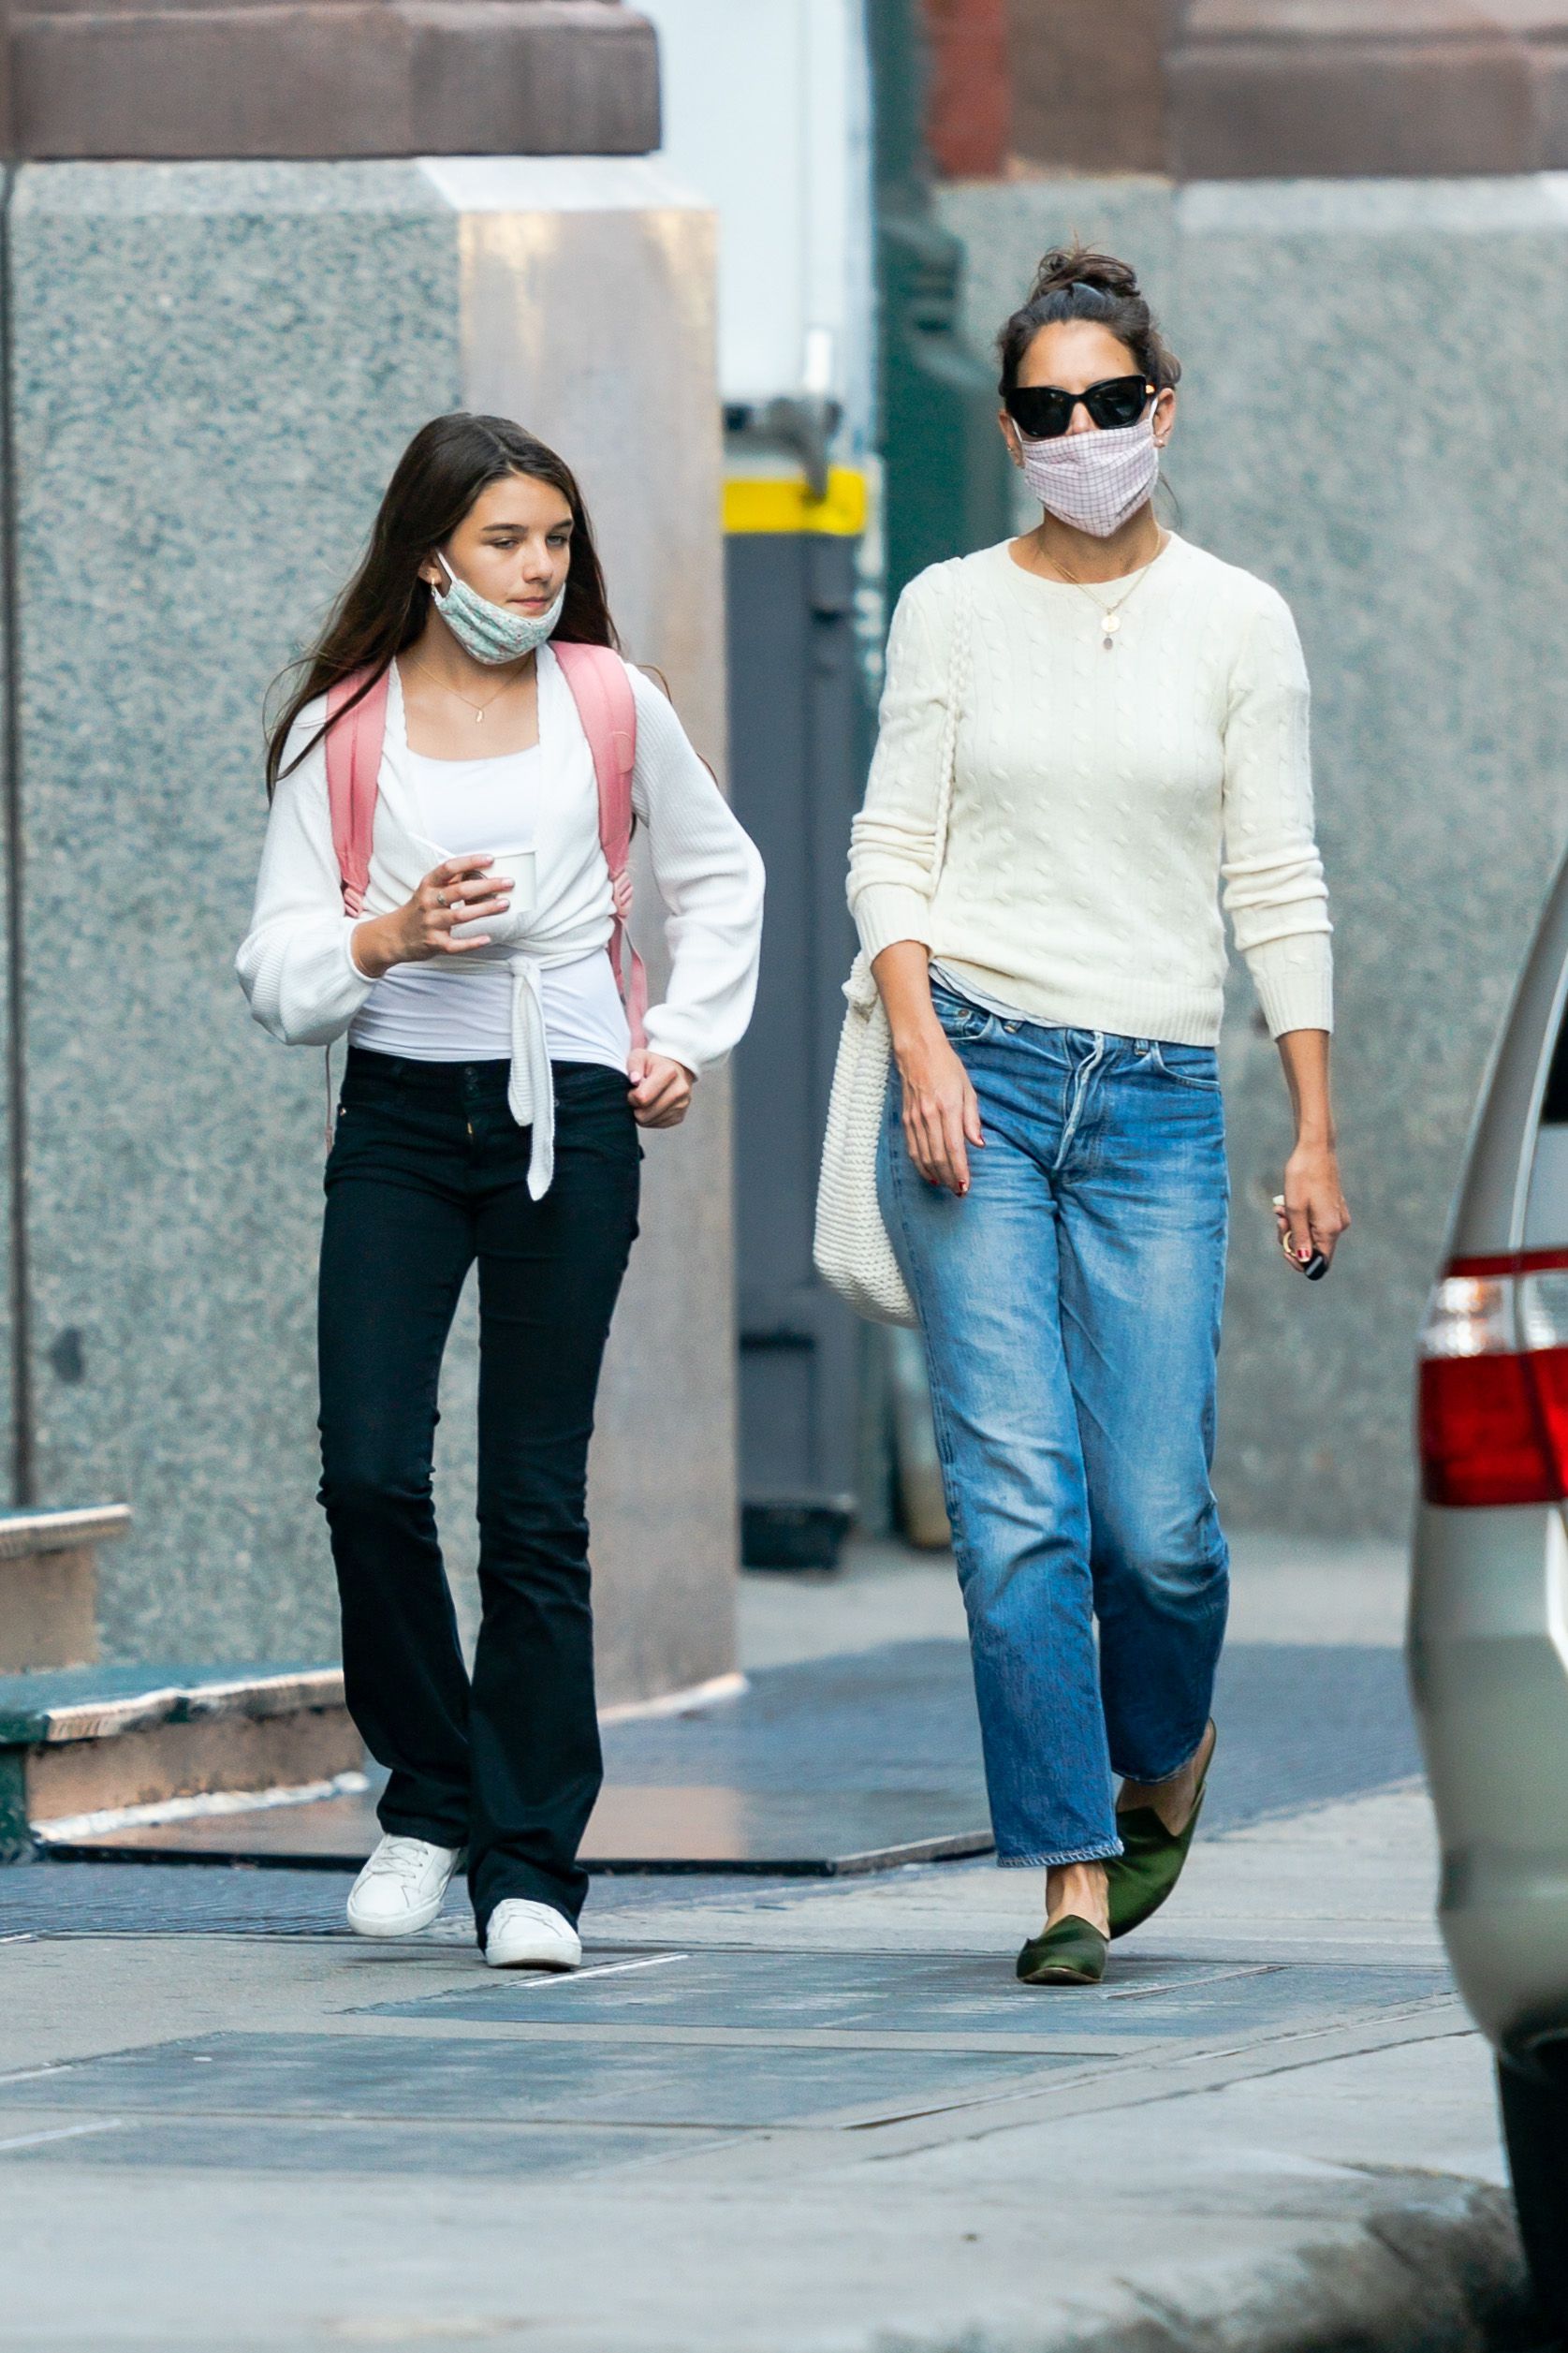 Katie Holmes Recently celebrated her daughter, Suri Cruise, seen alongside her in New York in September 2020, graduating from high school